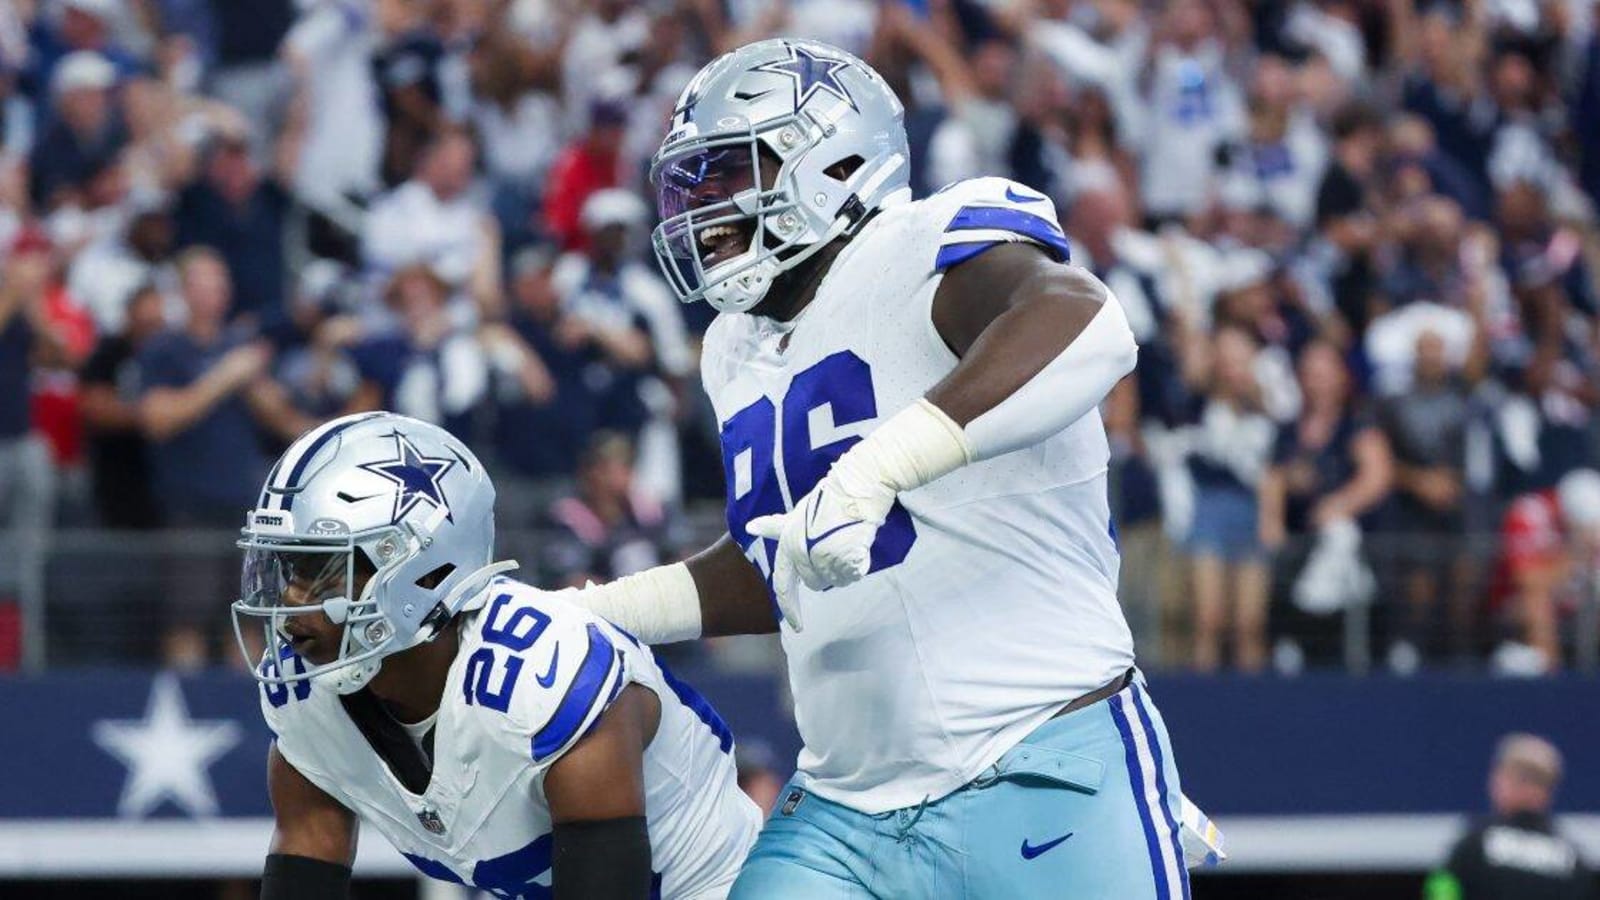 Report: Dallas Cowboys defensive tackle Neville Gallimore to sign with Miami Dolphins